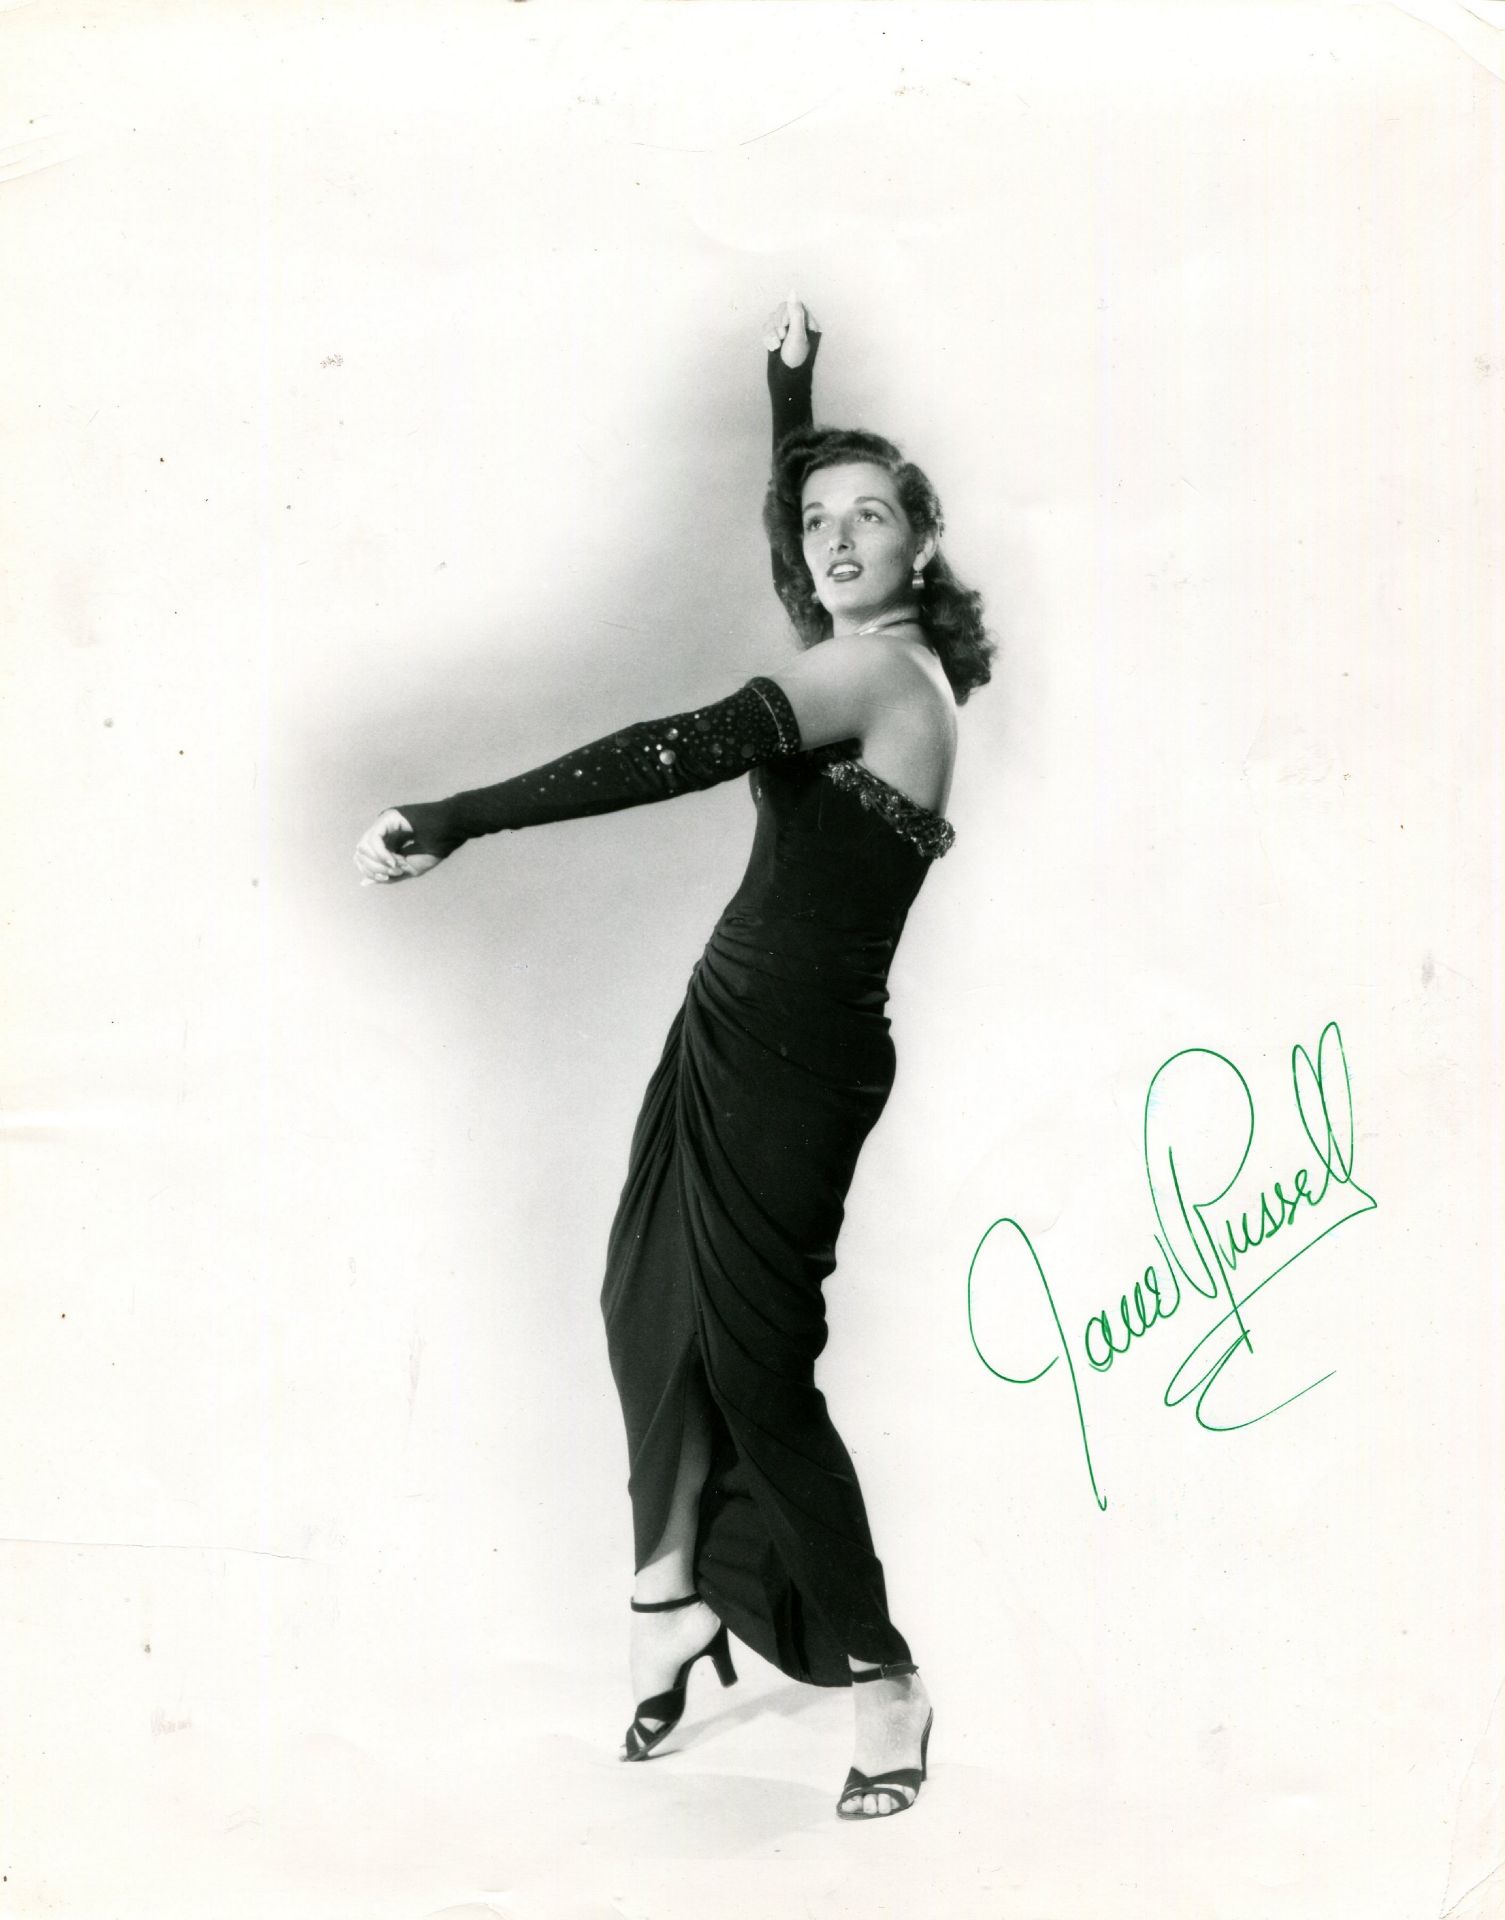 RUSSELL JANE: (1921-2011) American actress and sex symbol.